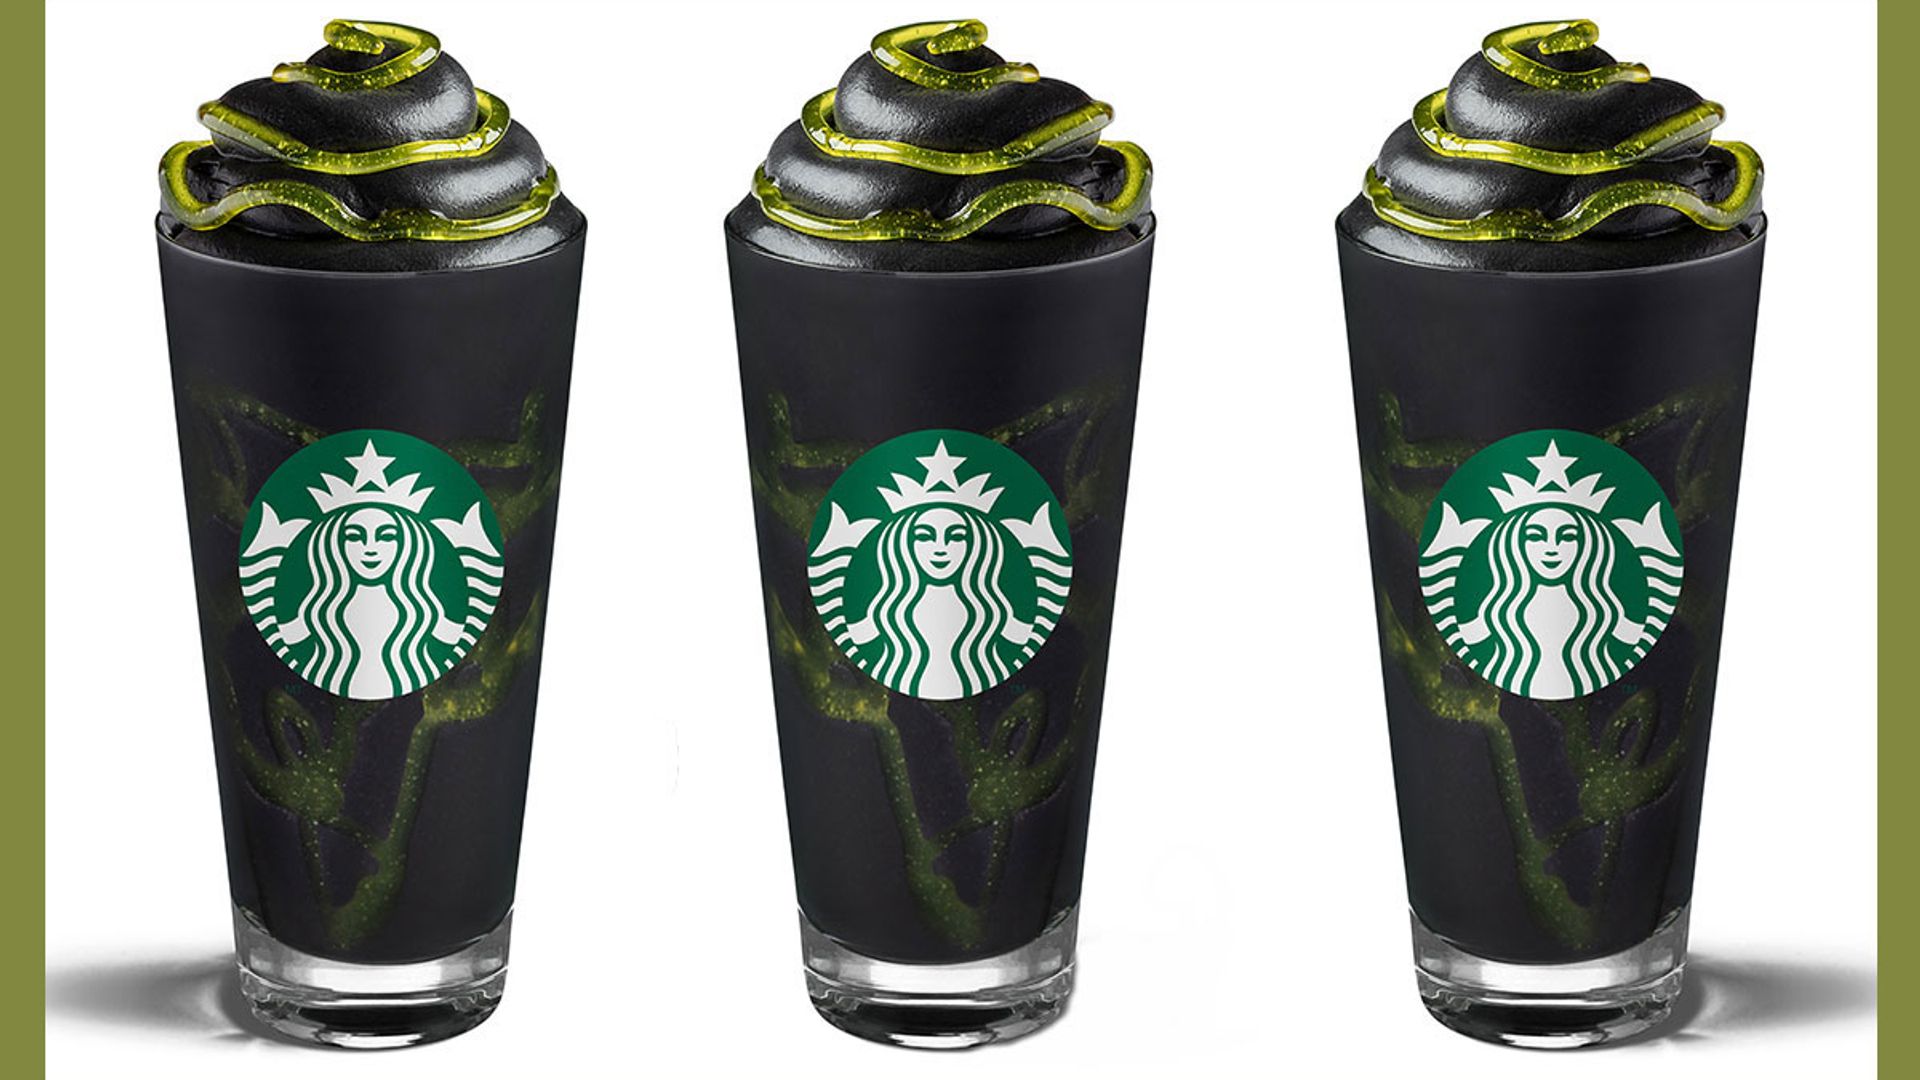 Starbucks launches a new BLACK 'Phantom' Frappuccino for Halloween and it's scarily good!